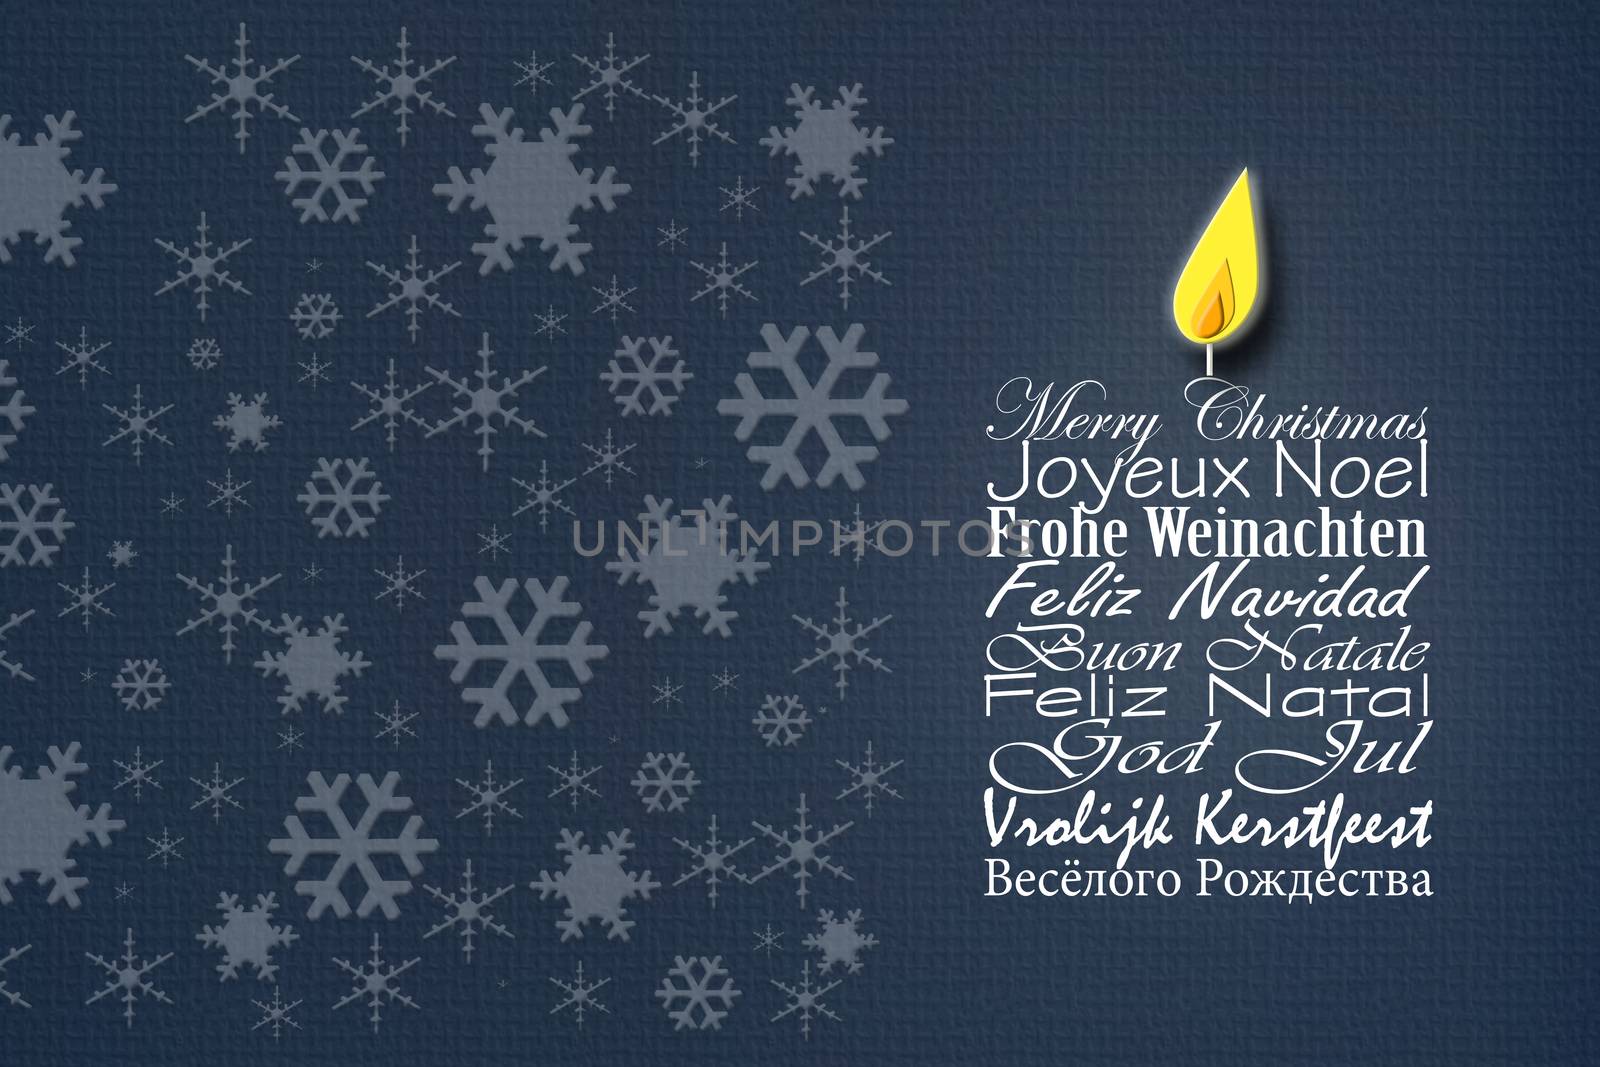 Merry Christmas business card. Christmas wishes in European languages English, French, German, Portuguese, Italian, Spanish, Swedish, Dutch, Russian on blue background with snowflakes. 3D illustration